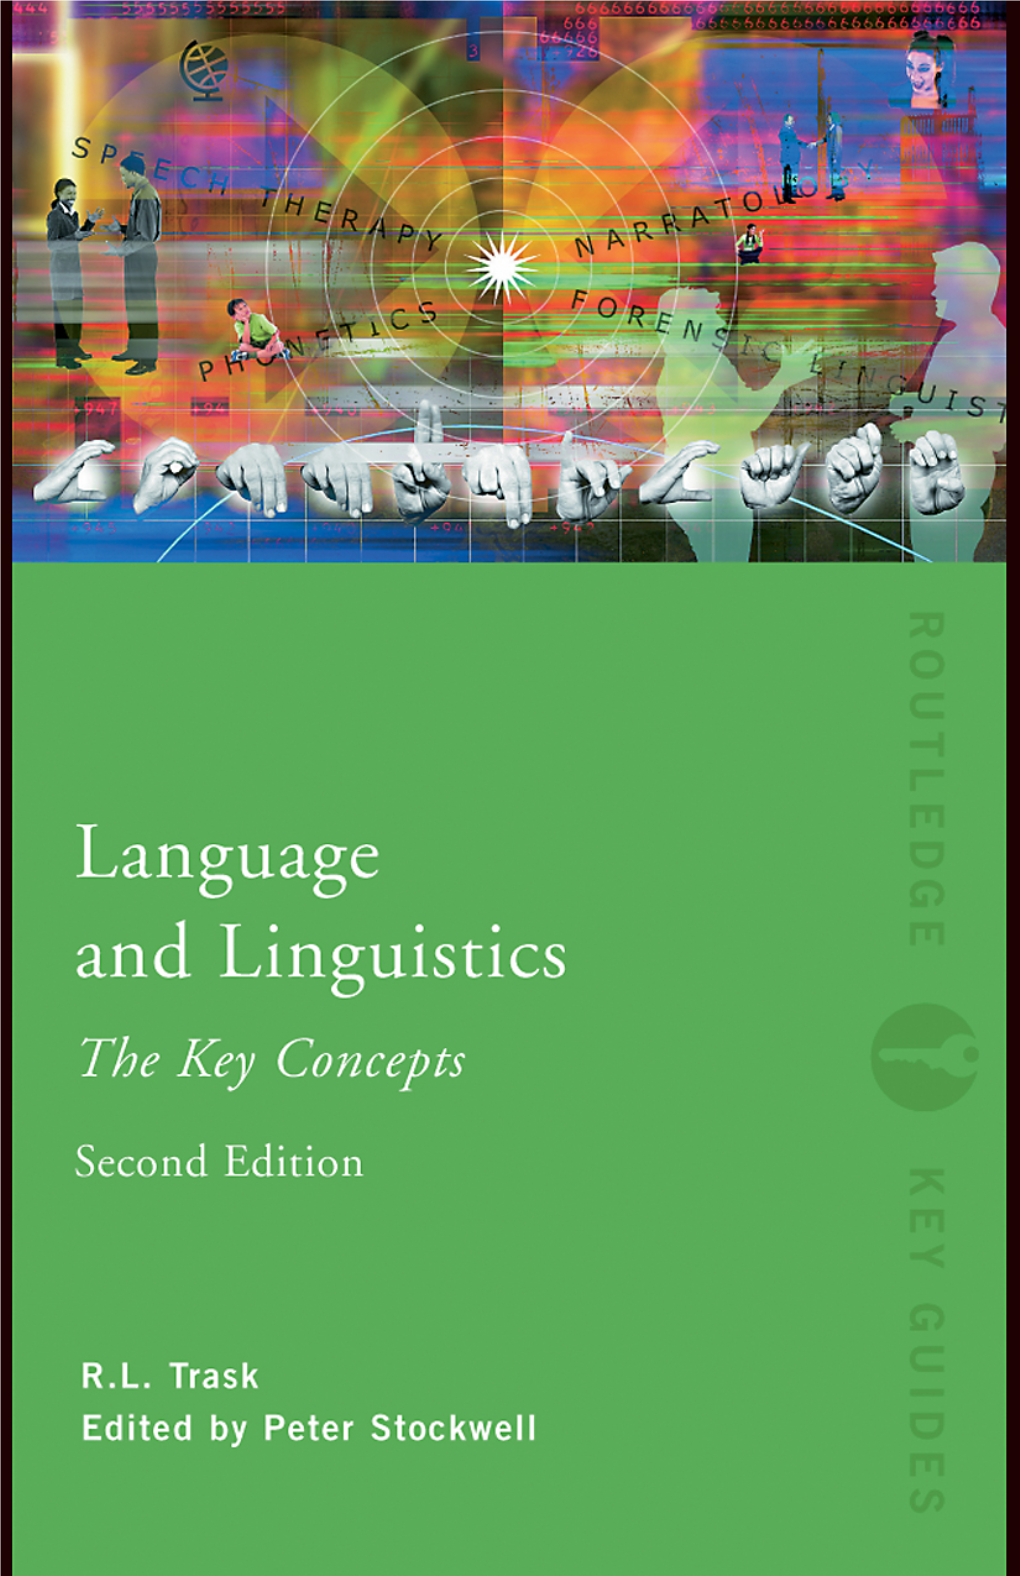 Language and Linguistics: the Key Concepts, Second Edition